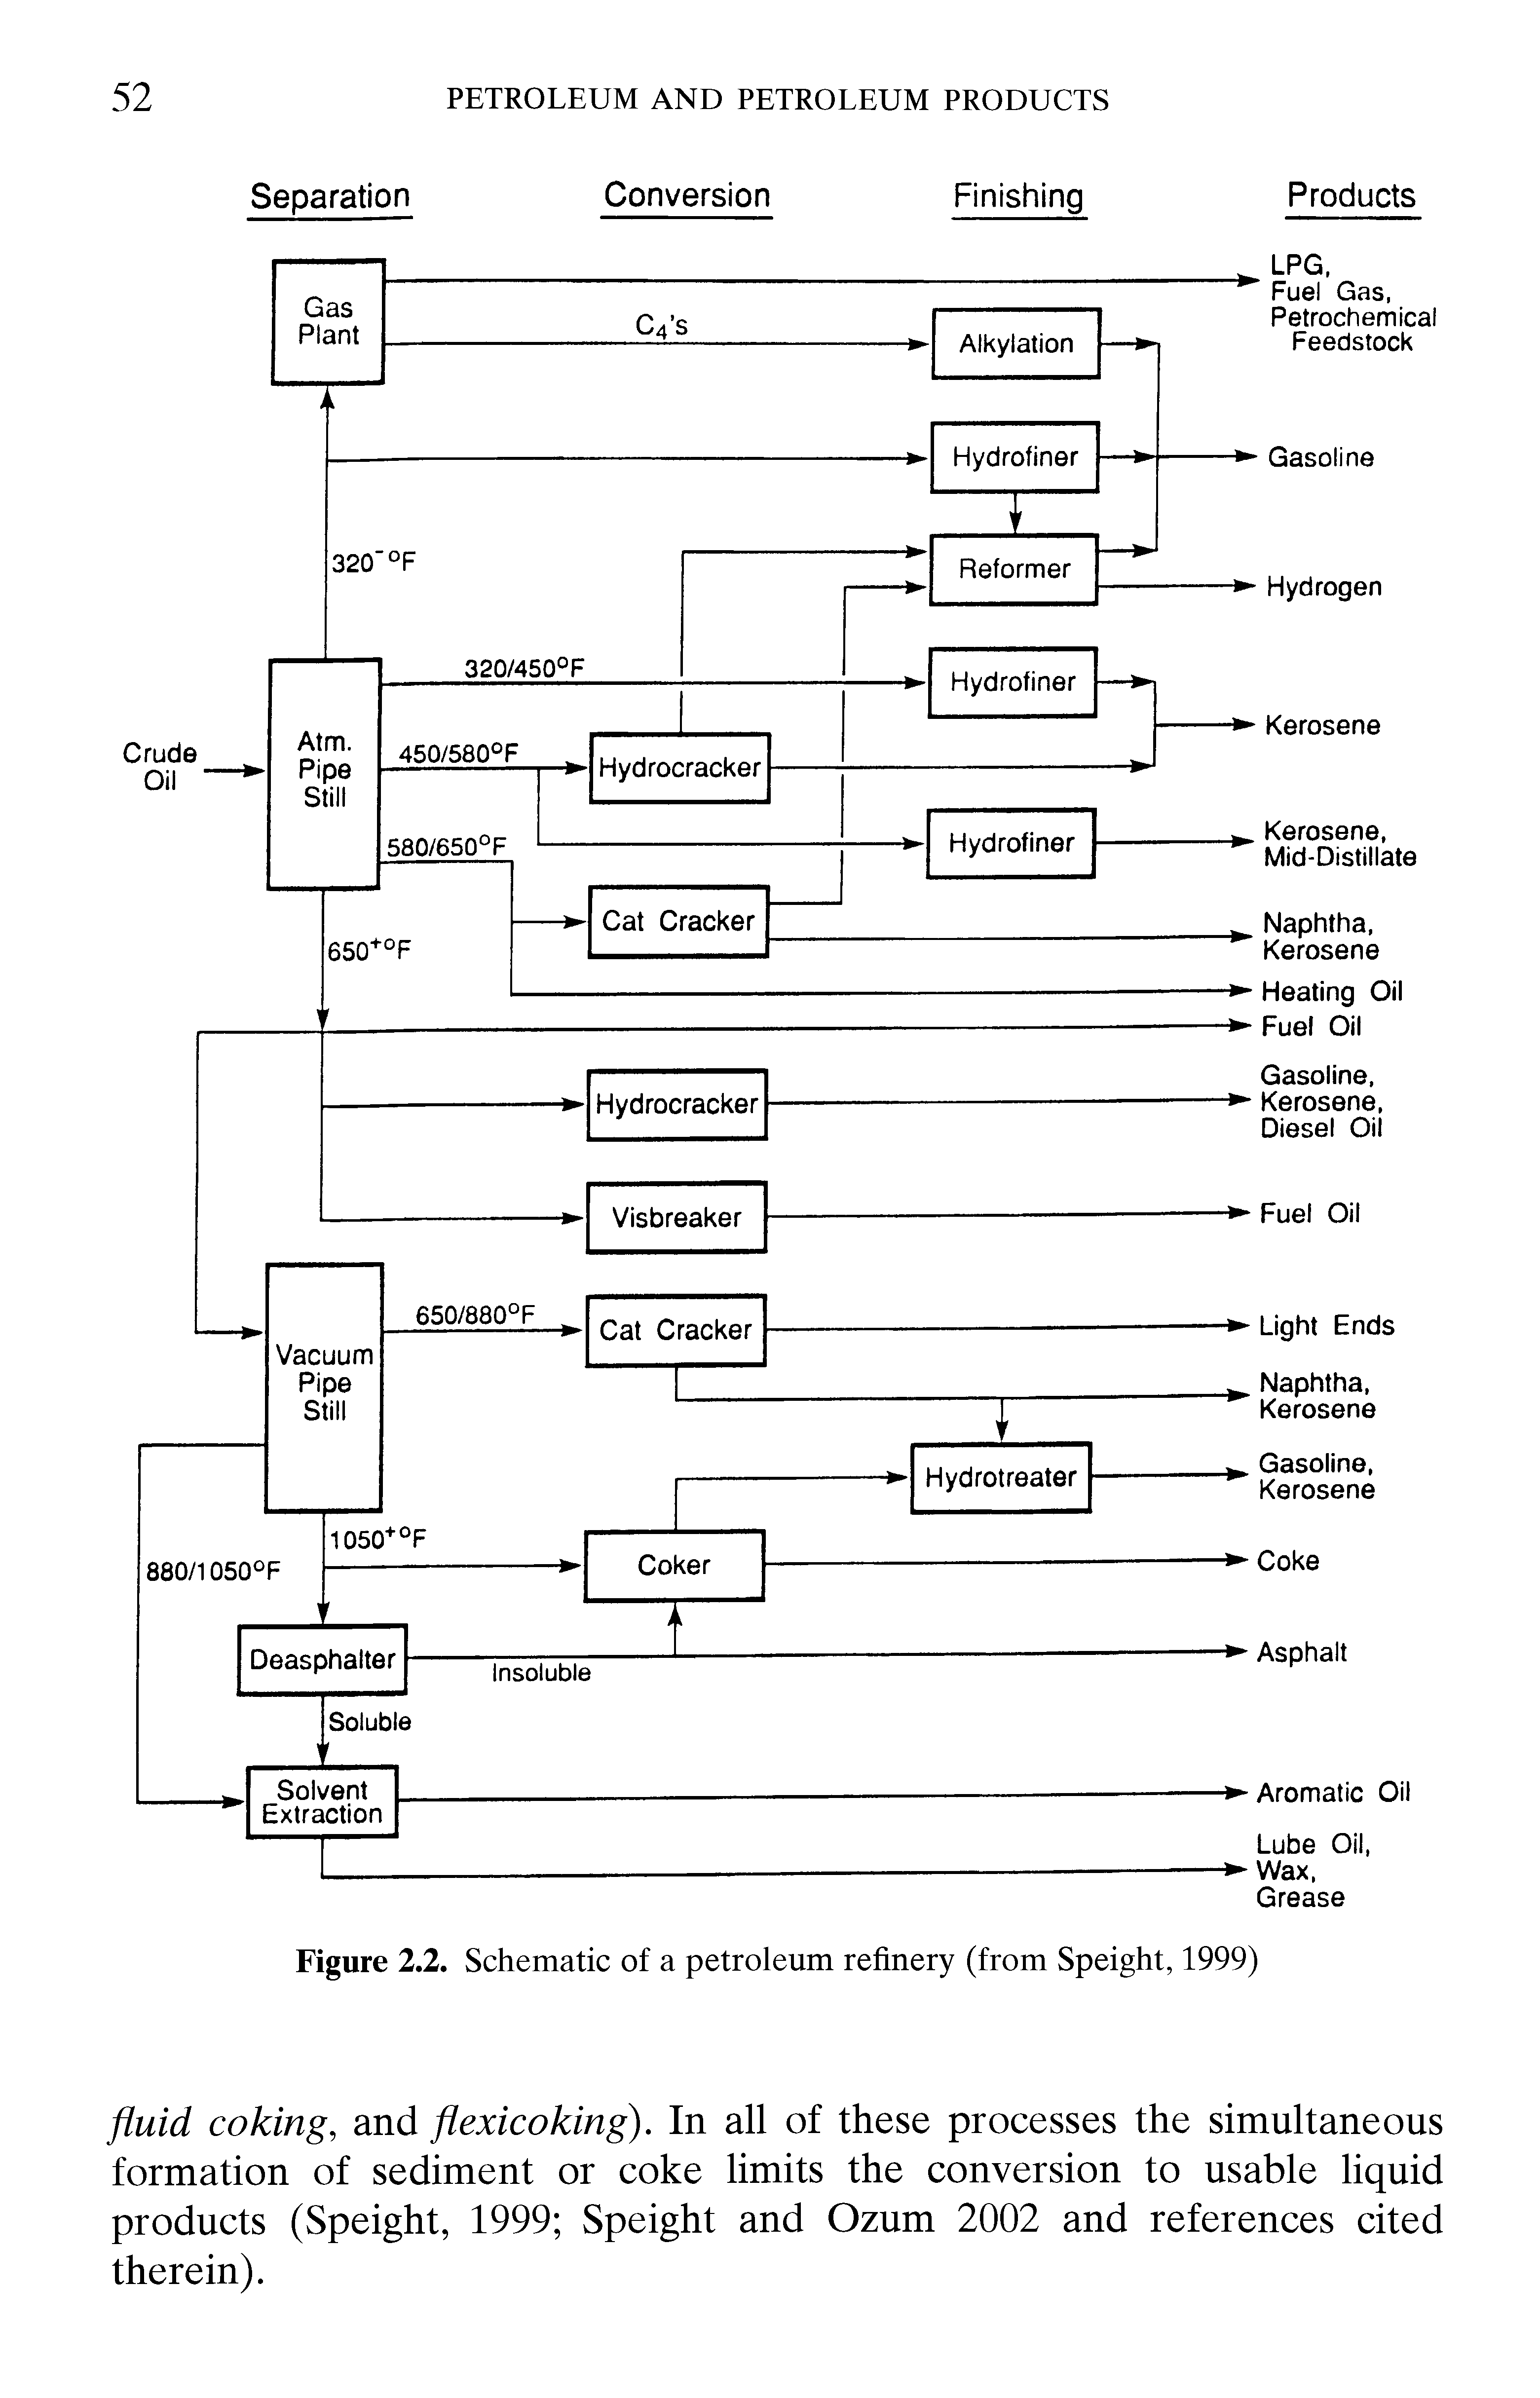 Figure 2.2. Schematic of a petroleum refinery (from Speight, 1999)...